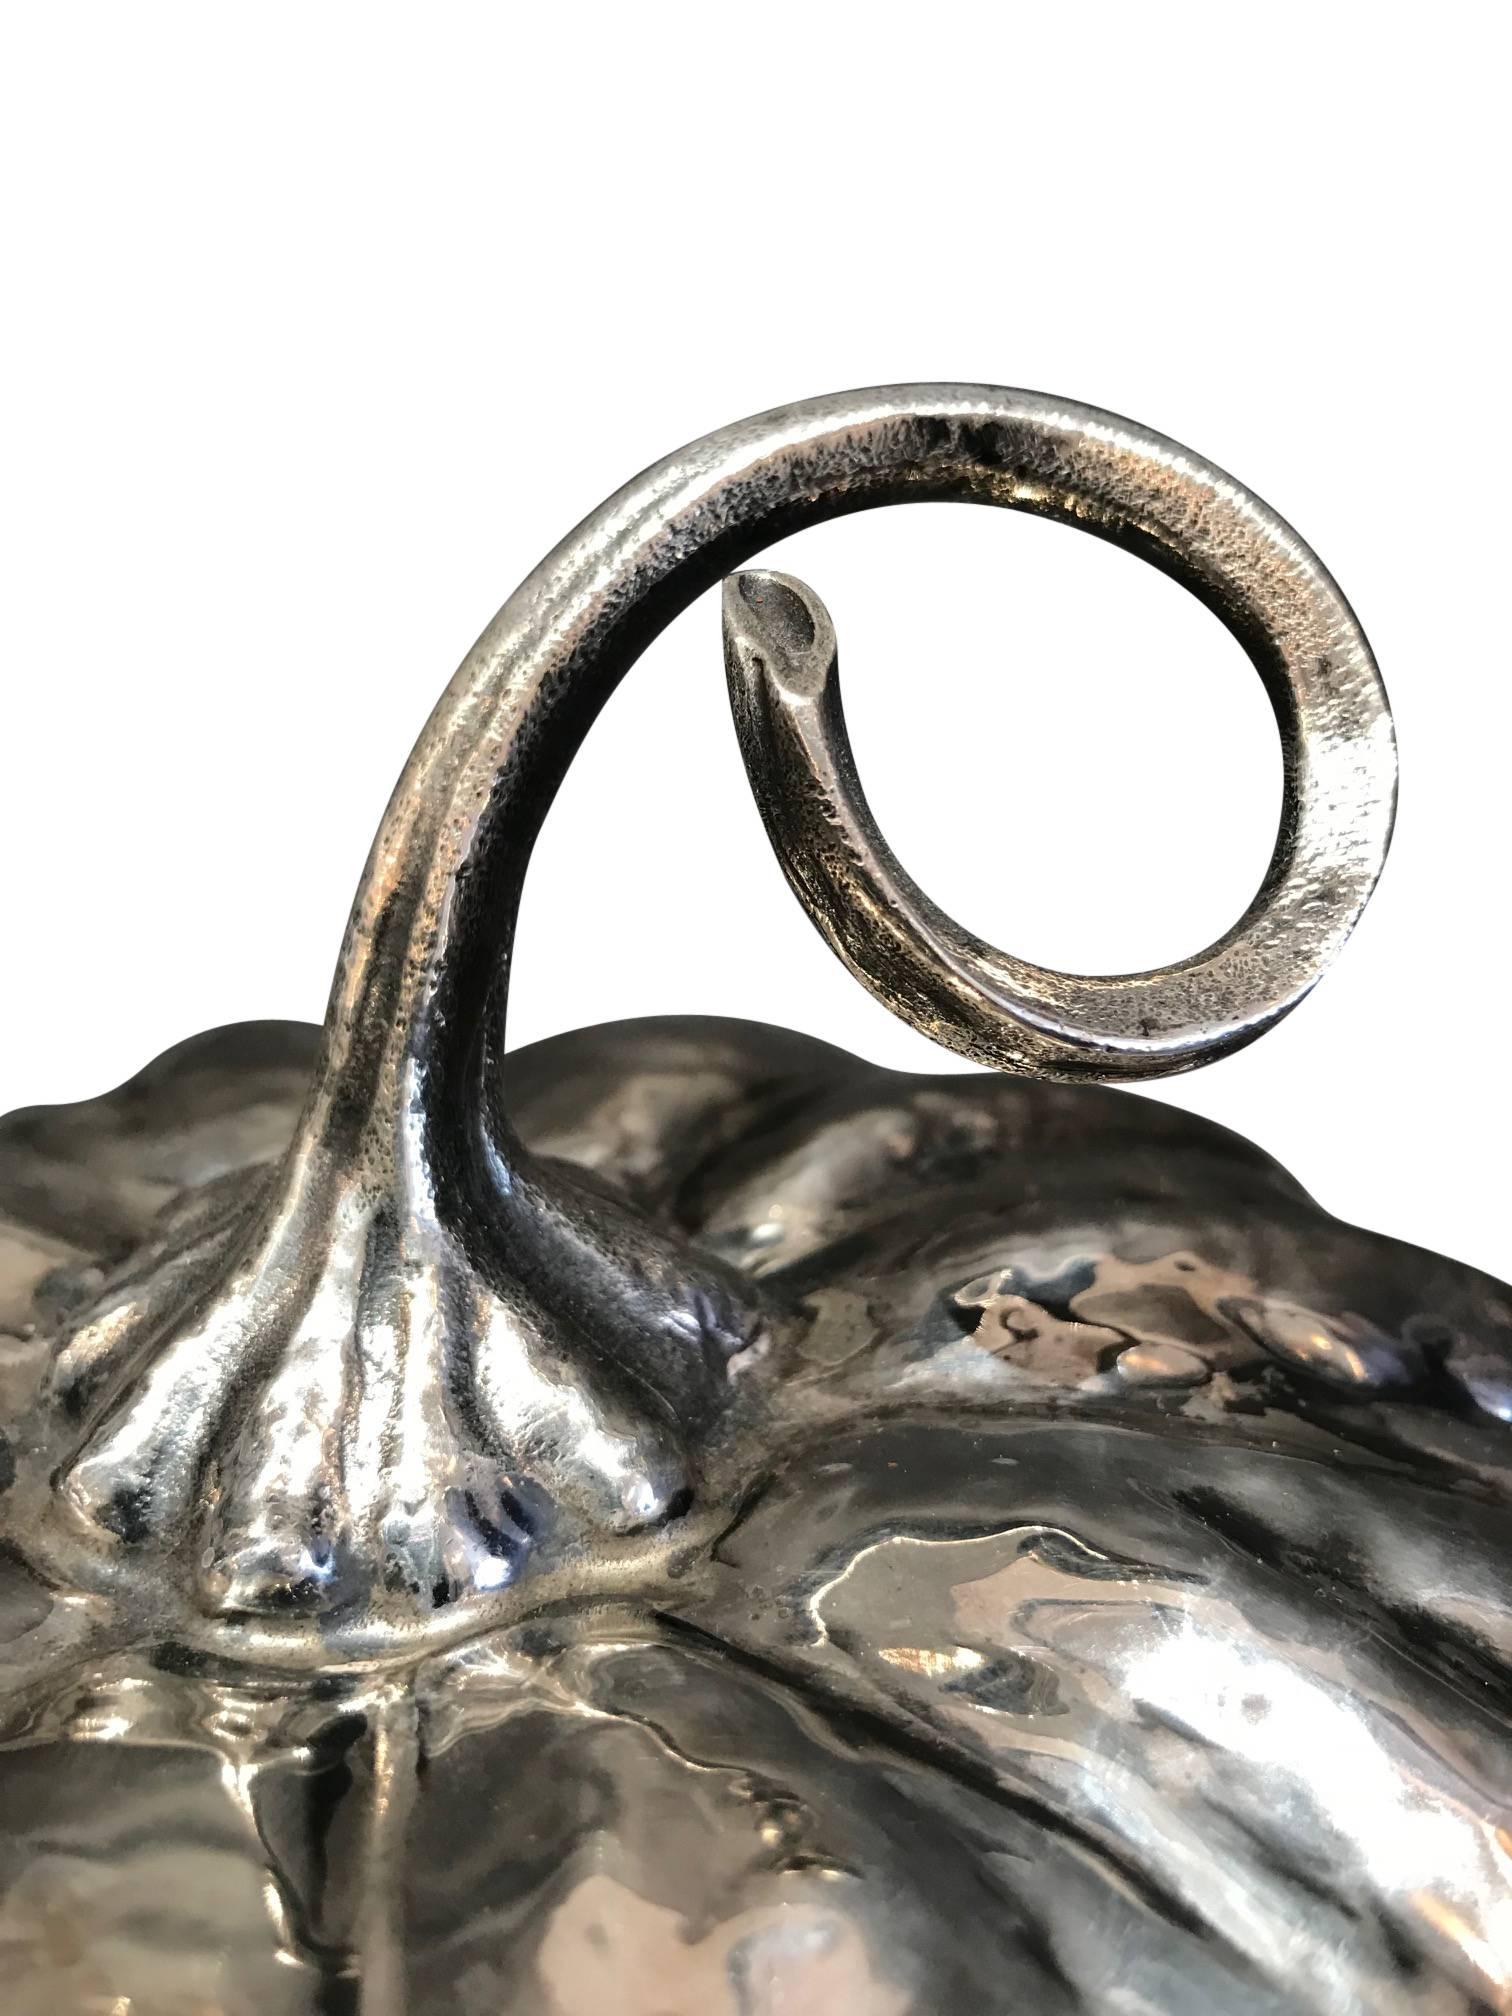 A Rare Silver Pumpkin with glass dish by Mario Buccellati, circa 1950.  Stamped M. Buccellati 925.

In 1919 Mario Buccellati opened his activity and, after the establishment of stores in Milan, Rome, Florence, began the development of overseas